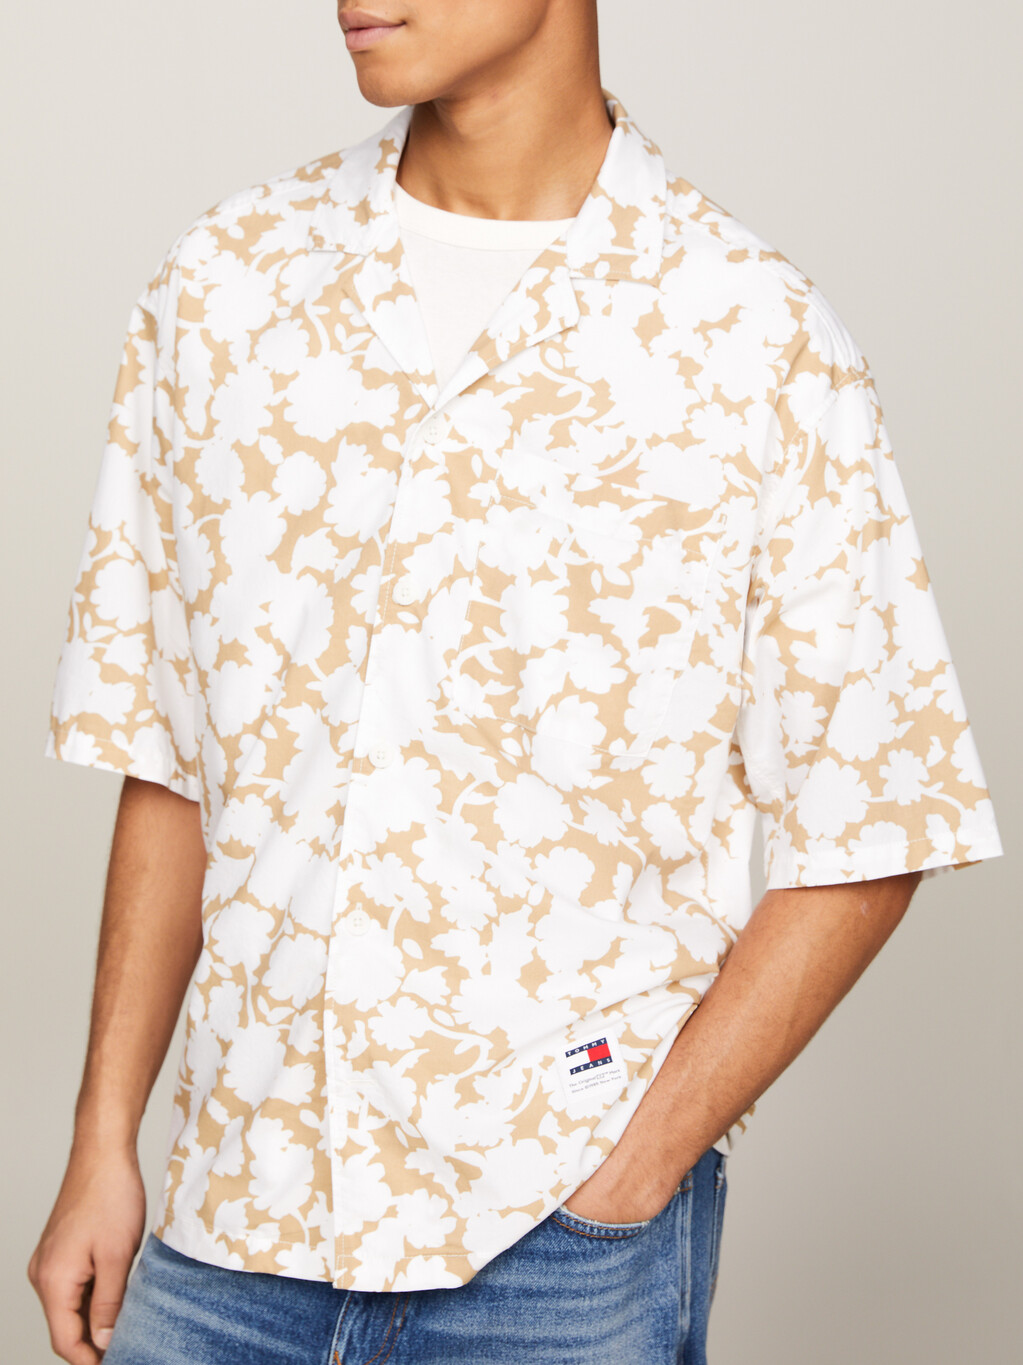 Floral Print Relaxed Short Sleeve Shirt, Floral Aop White, hi-res